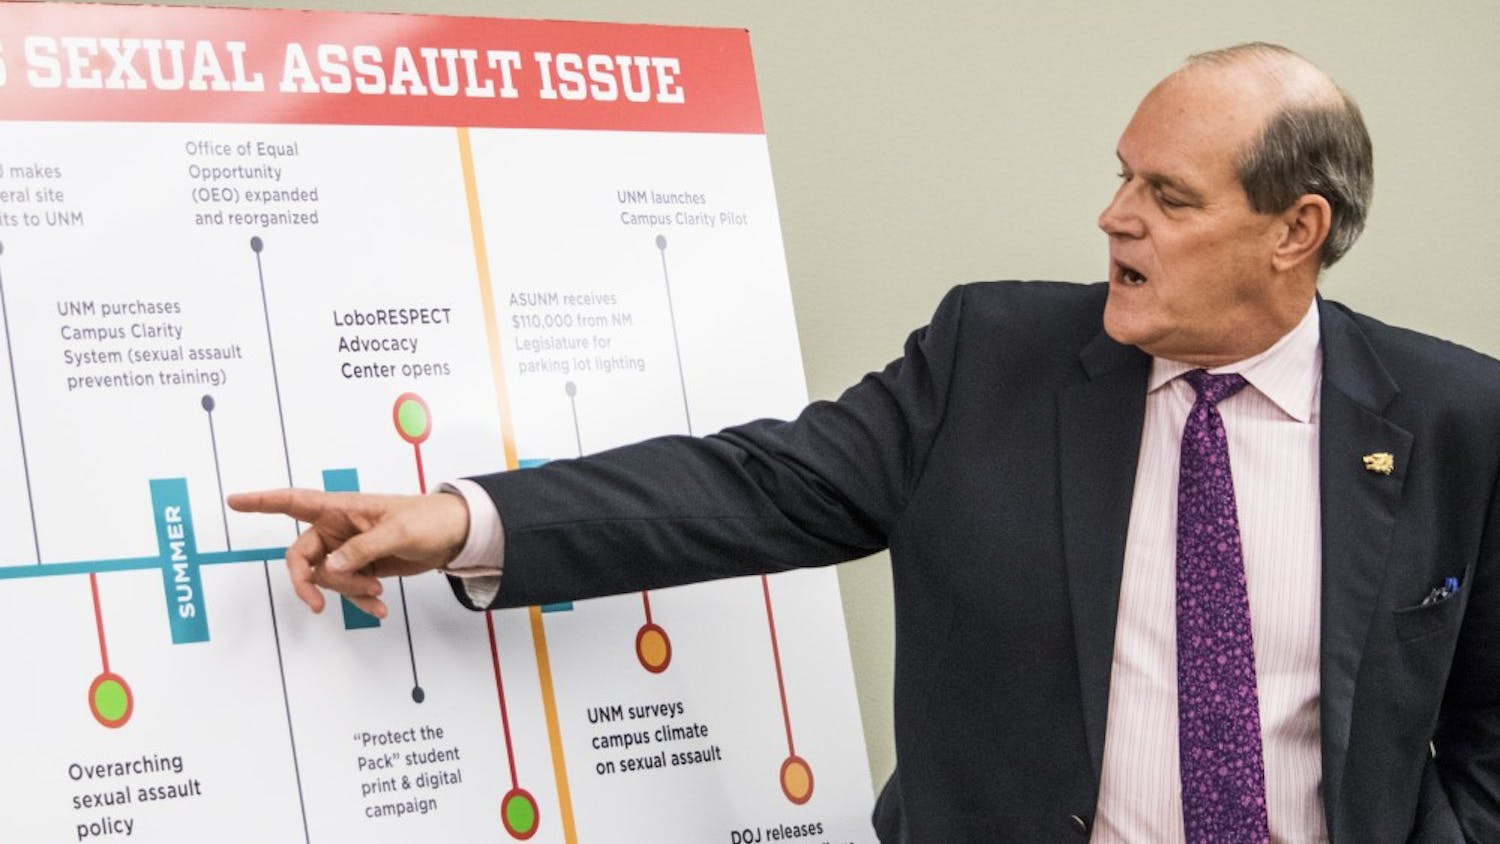 University President Robert Frank speaks at a conference held to address the Department of Justice's findings regarding sexual assault on UNM campus Friday April 22, 2016. Several UNM departments and organizations, such as UNMPD and LoboRESPECT, have issued statements regarding the DOJ’s findings.